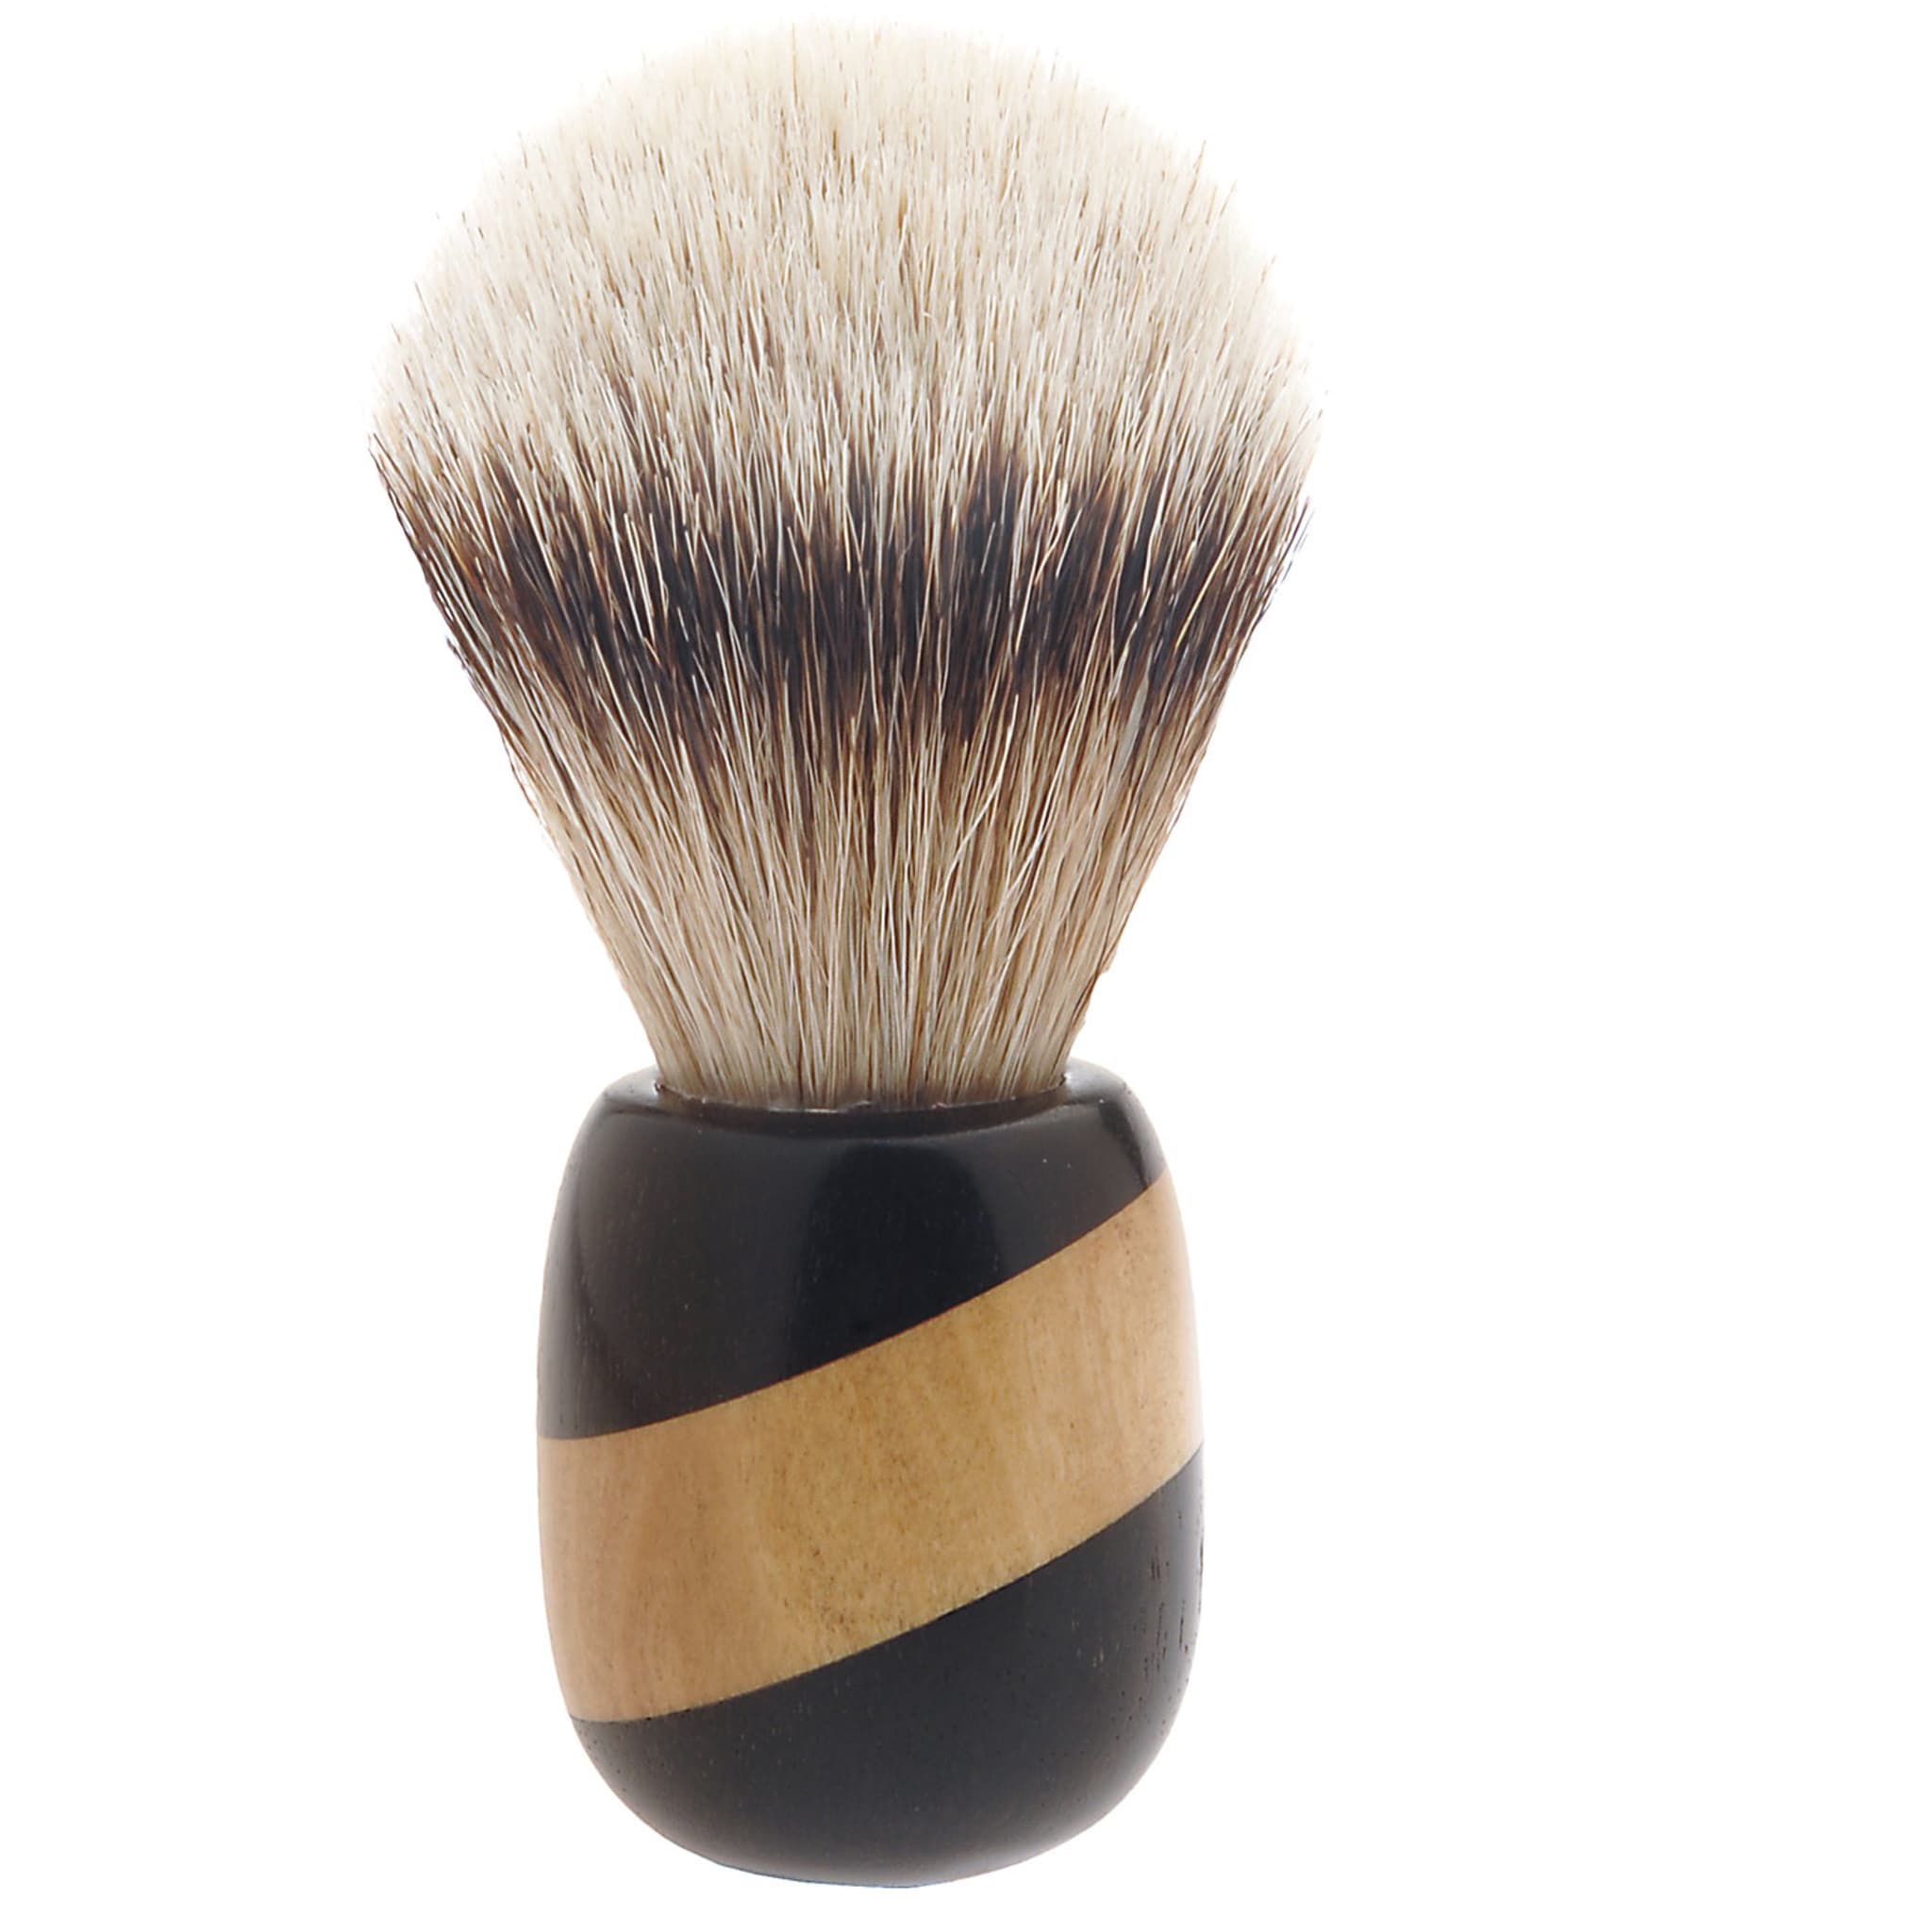 Shaving Brush in Maple and African Ebony Wood - Alternative view 1